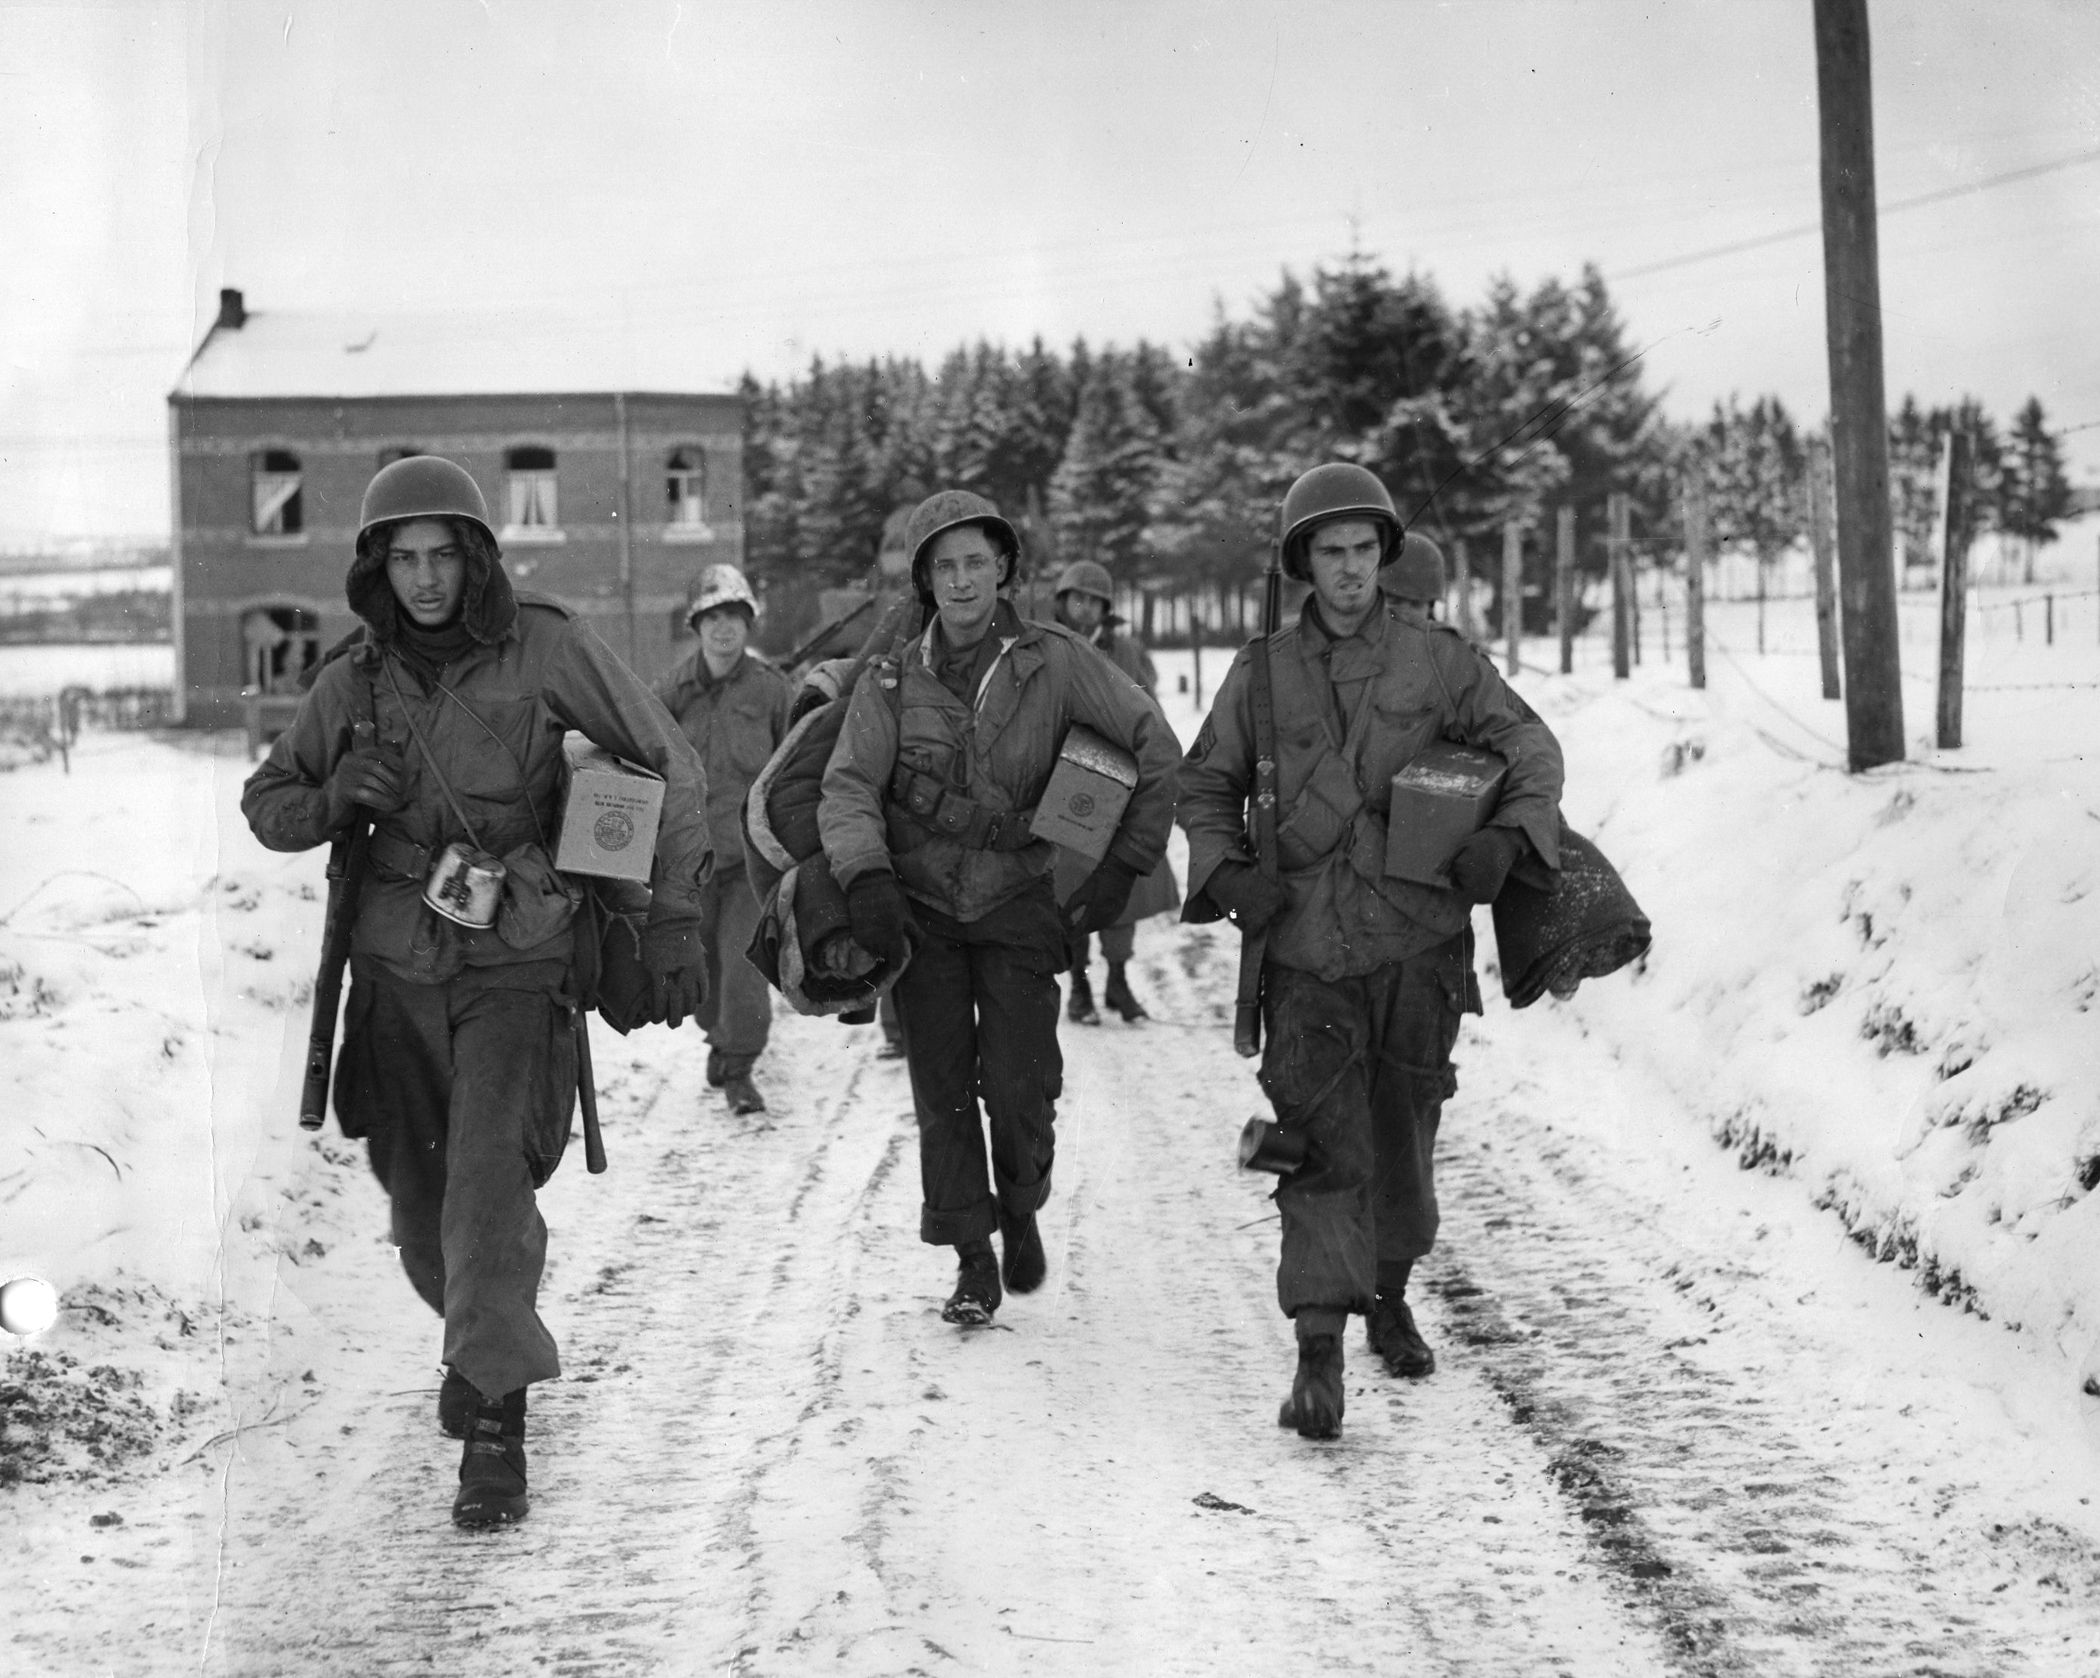 With newly acquired rations in hand, a group of paratroopers in surrounded Bastogne returns to the front line. Mauser ran into no man’s land to retrieve a supply container dropped by parachute.